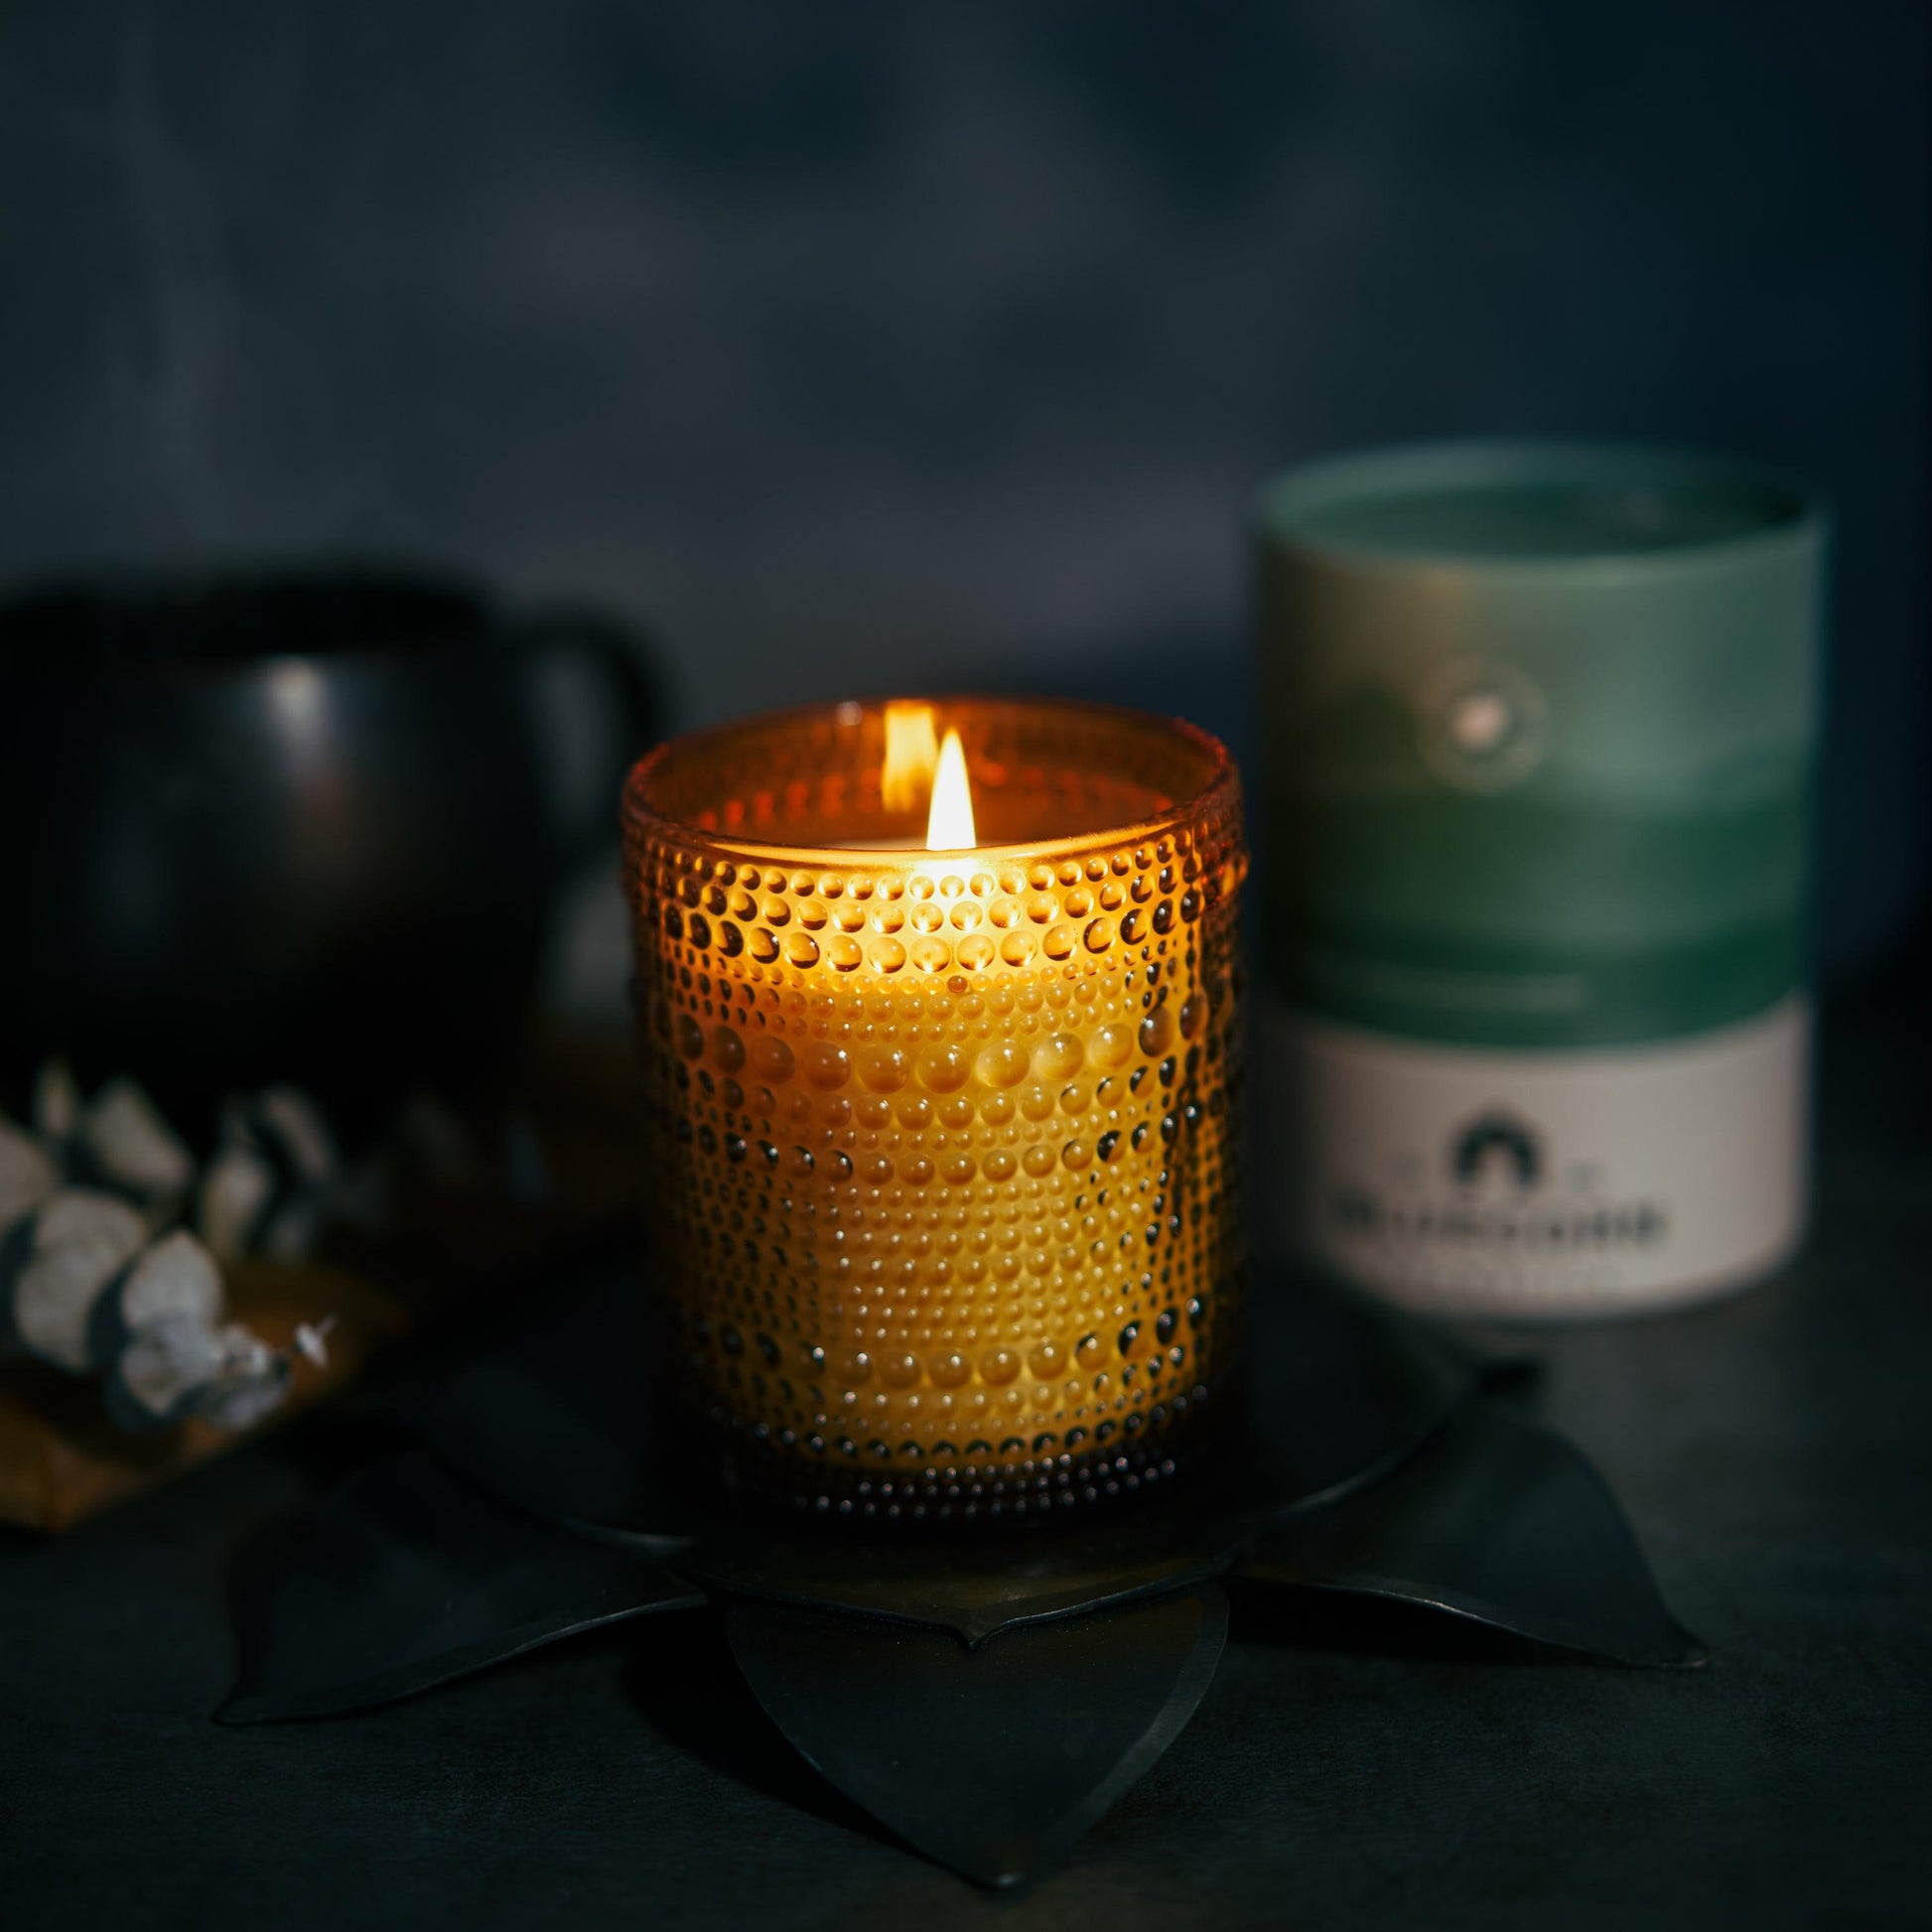 The Woodsy - Scented Coconut Wax Candle - Bluecorn Candles